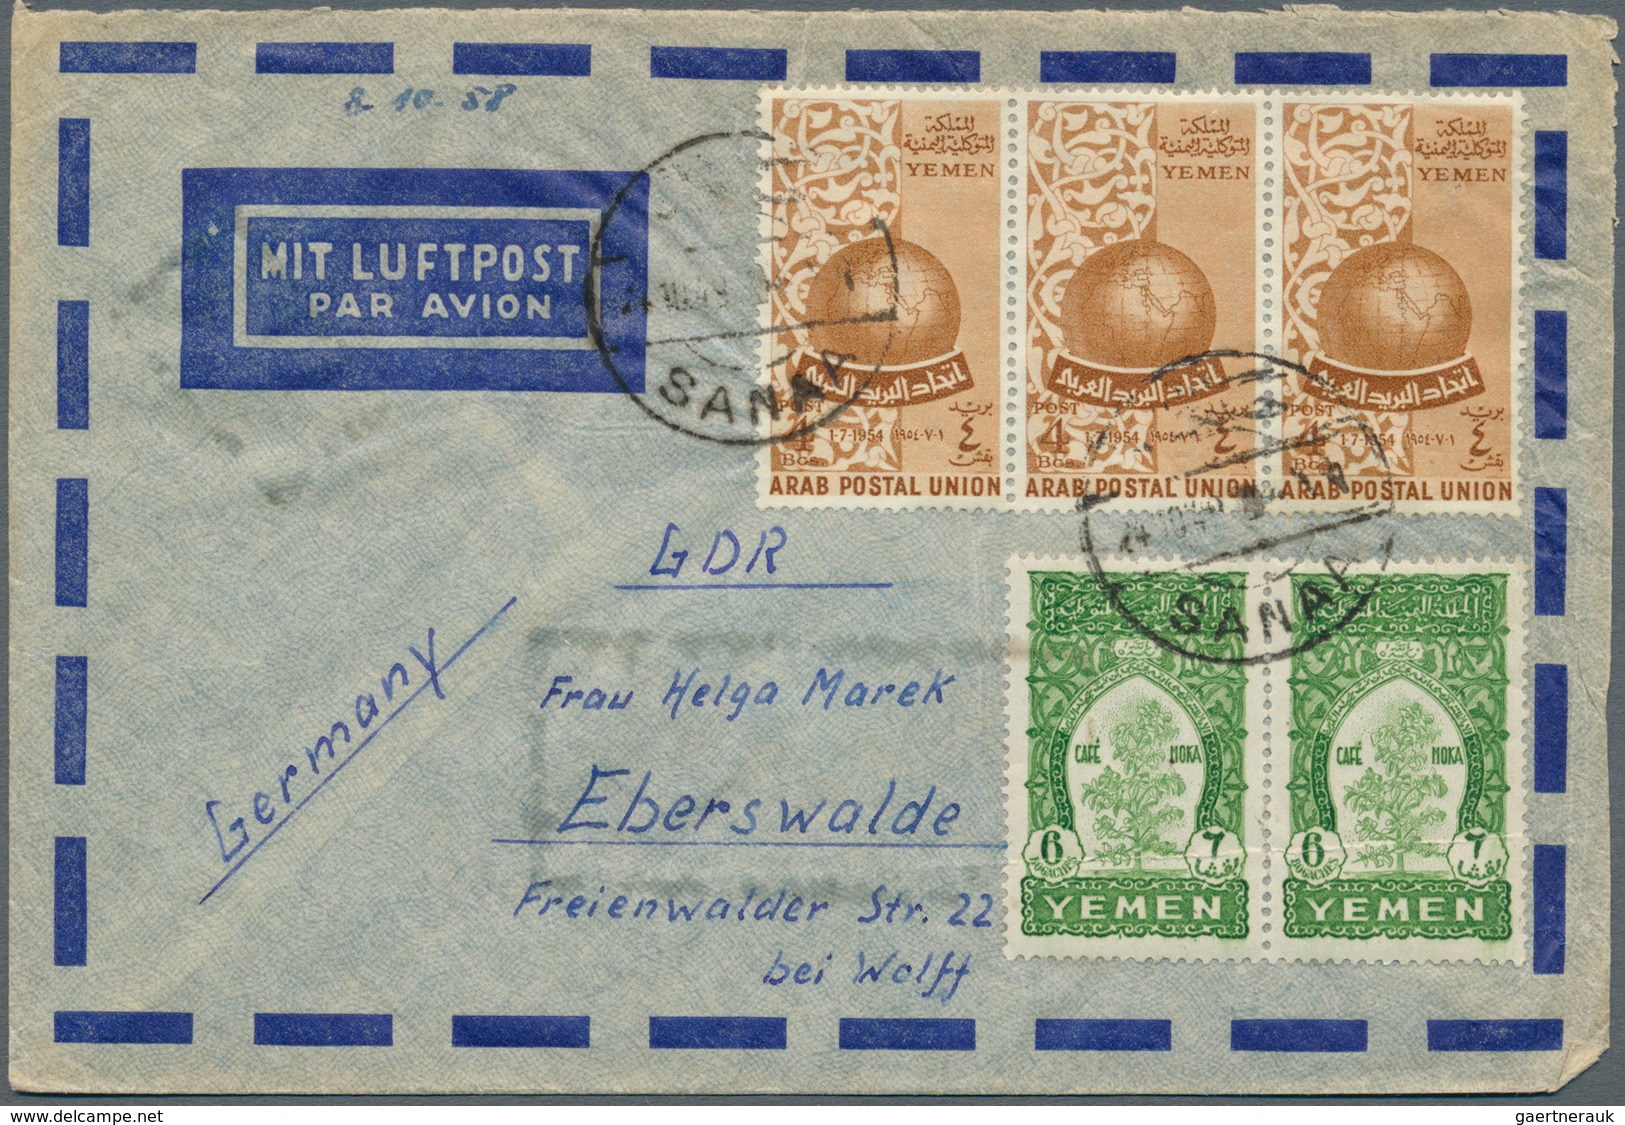 22998 Jemen: 1935/80 (ca.), Lot of 51 comercial covers, many airmails, some interesting cancellations, mos